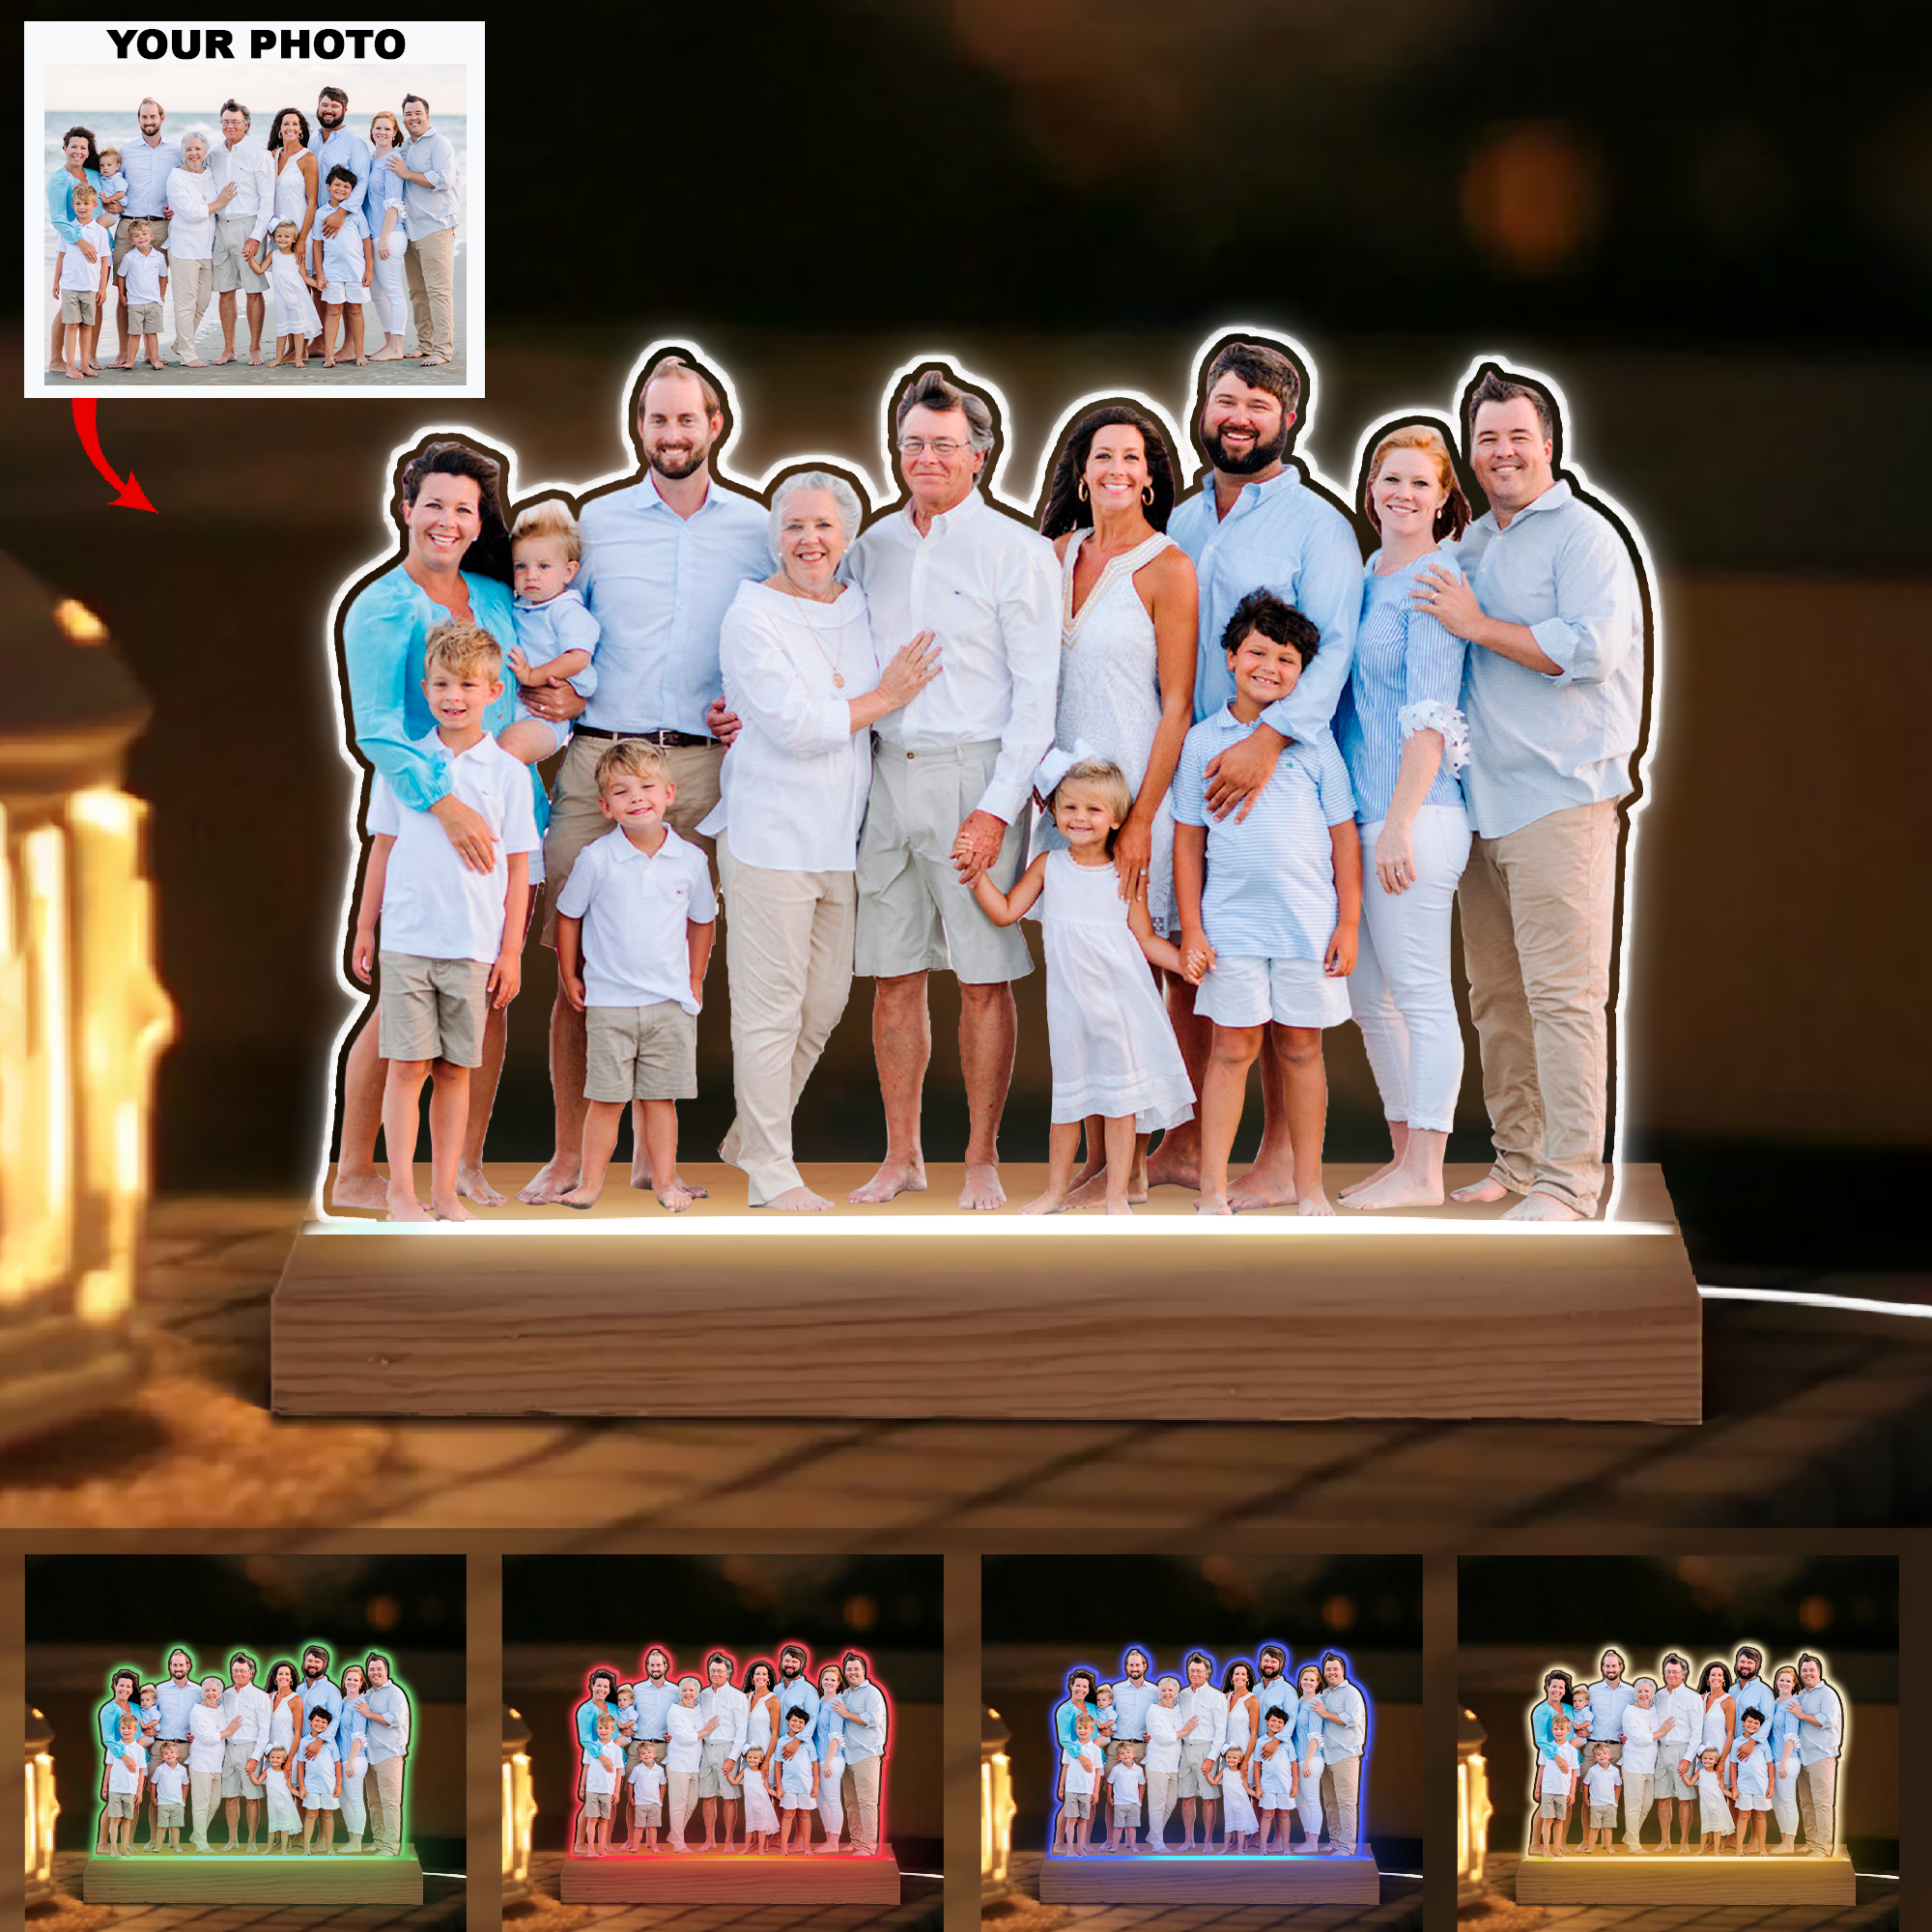 Personalized 3D LED Light Wooden Base - Gift For Family Members, Mom, Dad, Sisters, Brothers - Customized Your Photo ARND036 UPL0VL003